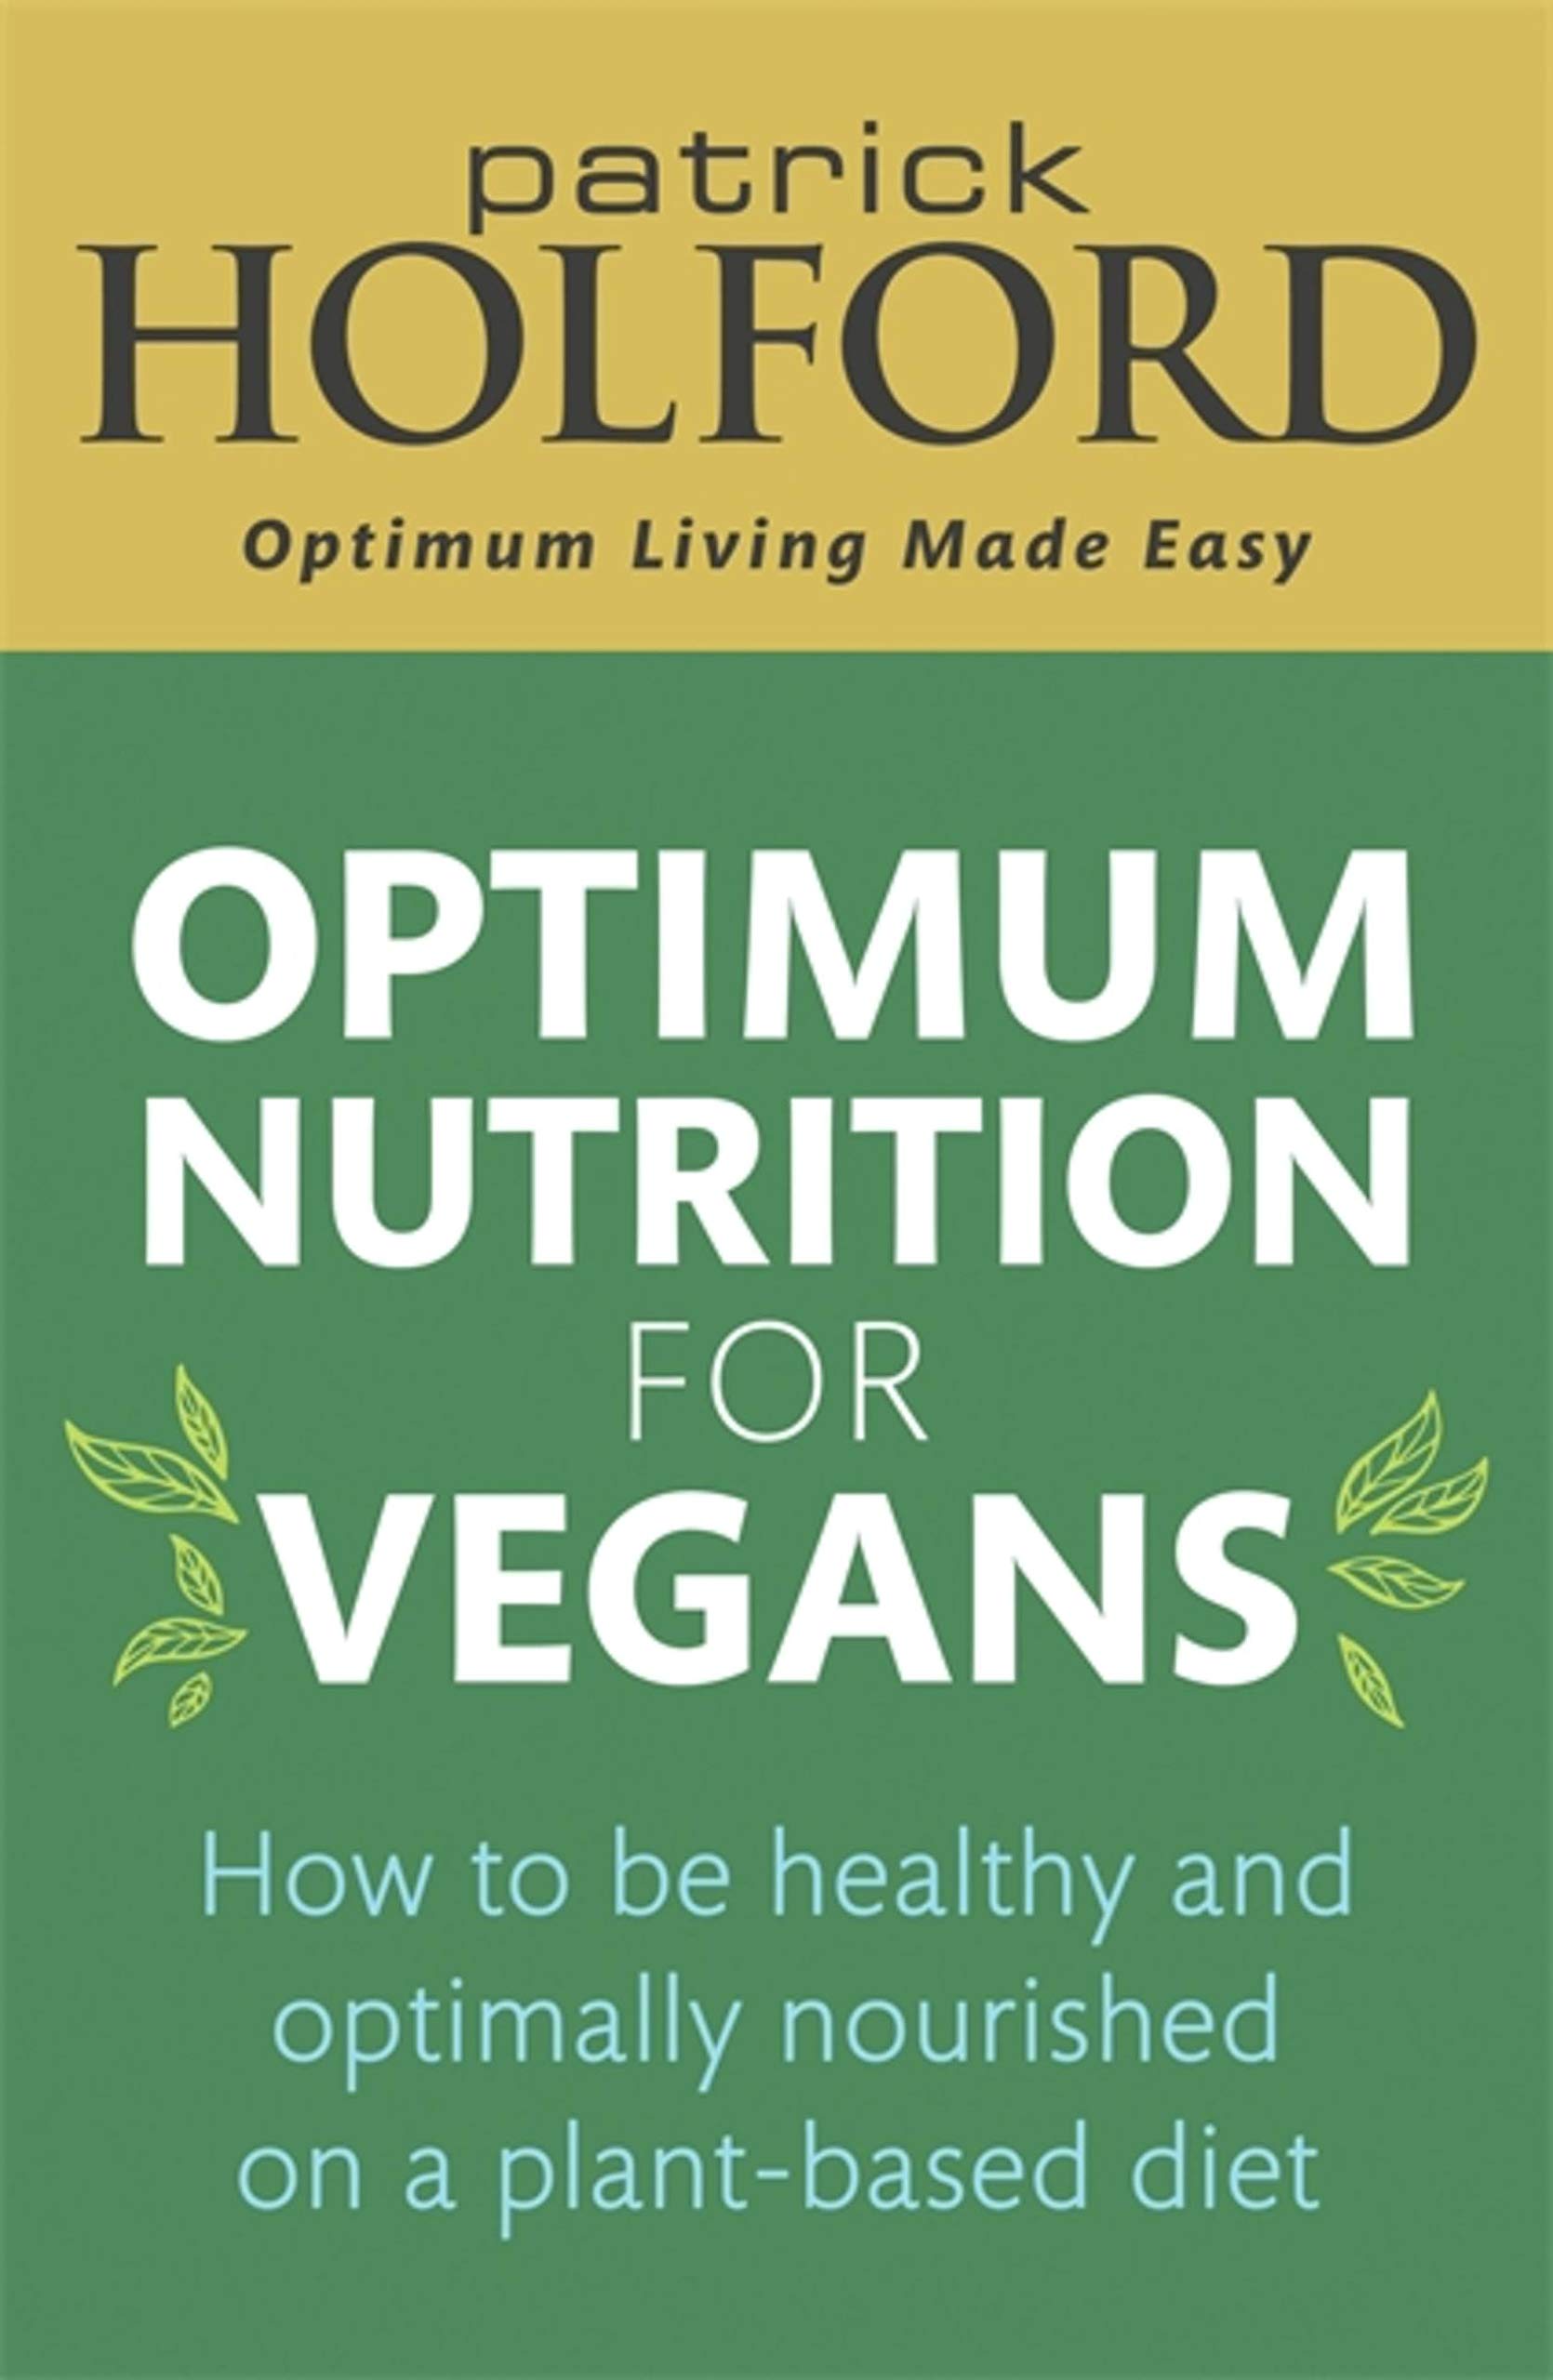 Optimum Nutrition for Vegans : How to Be Healthy and Optimally Nourished on a Plant-based Diet [Paperback] หนังสือภาษาอังกฤษพร้อมส่ง